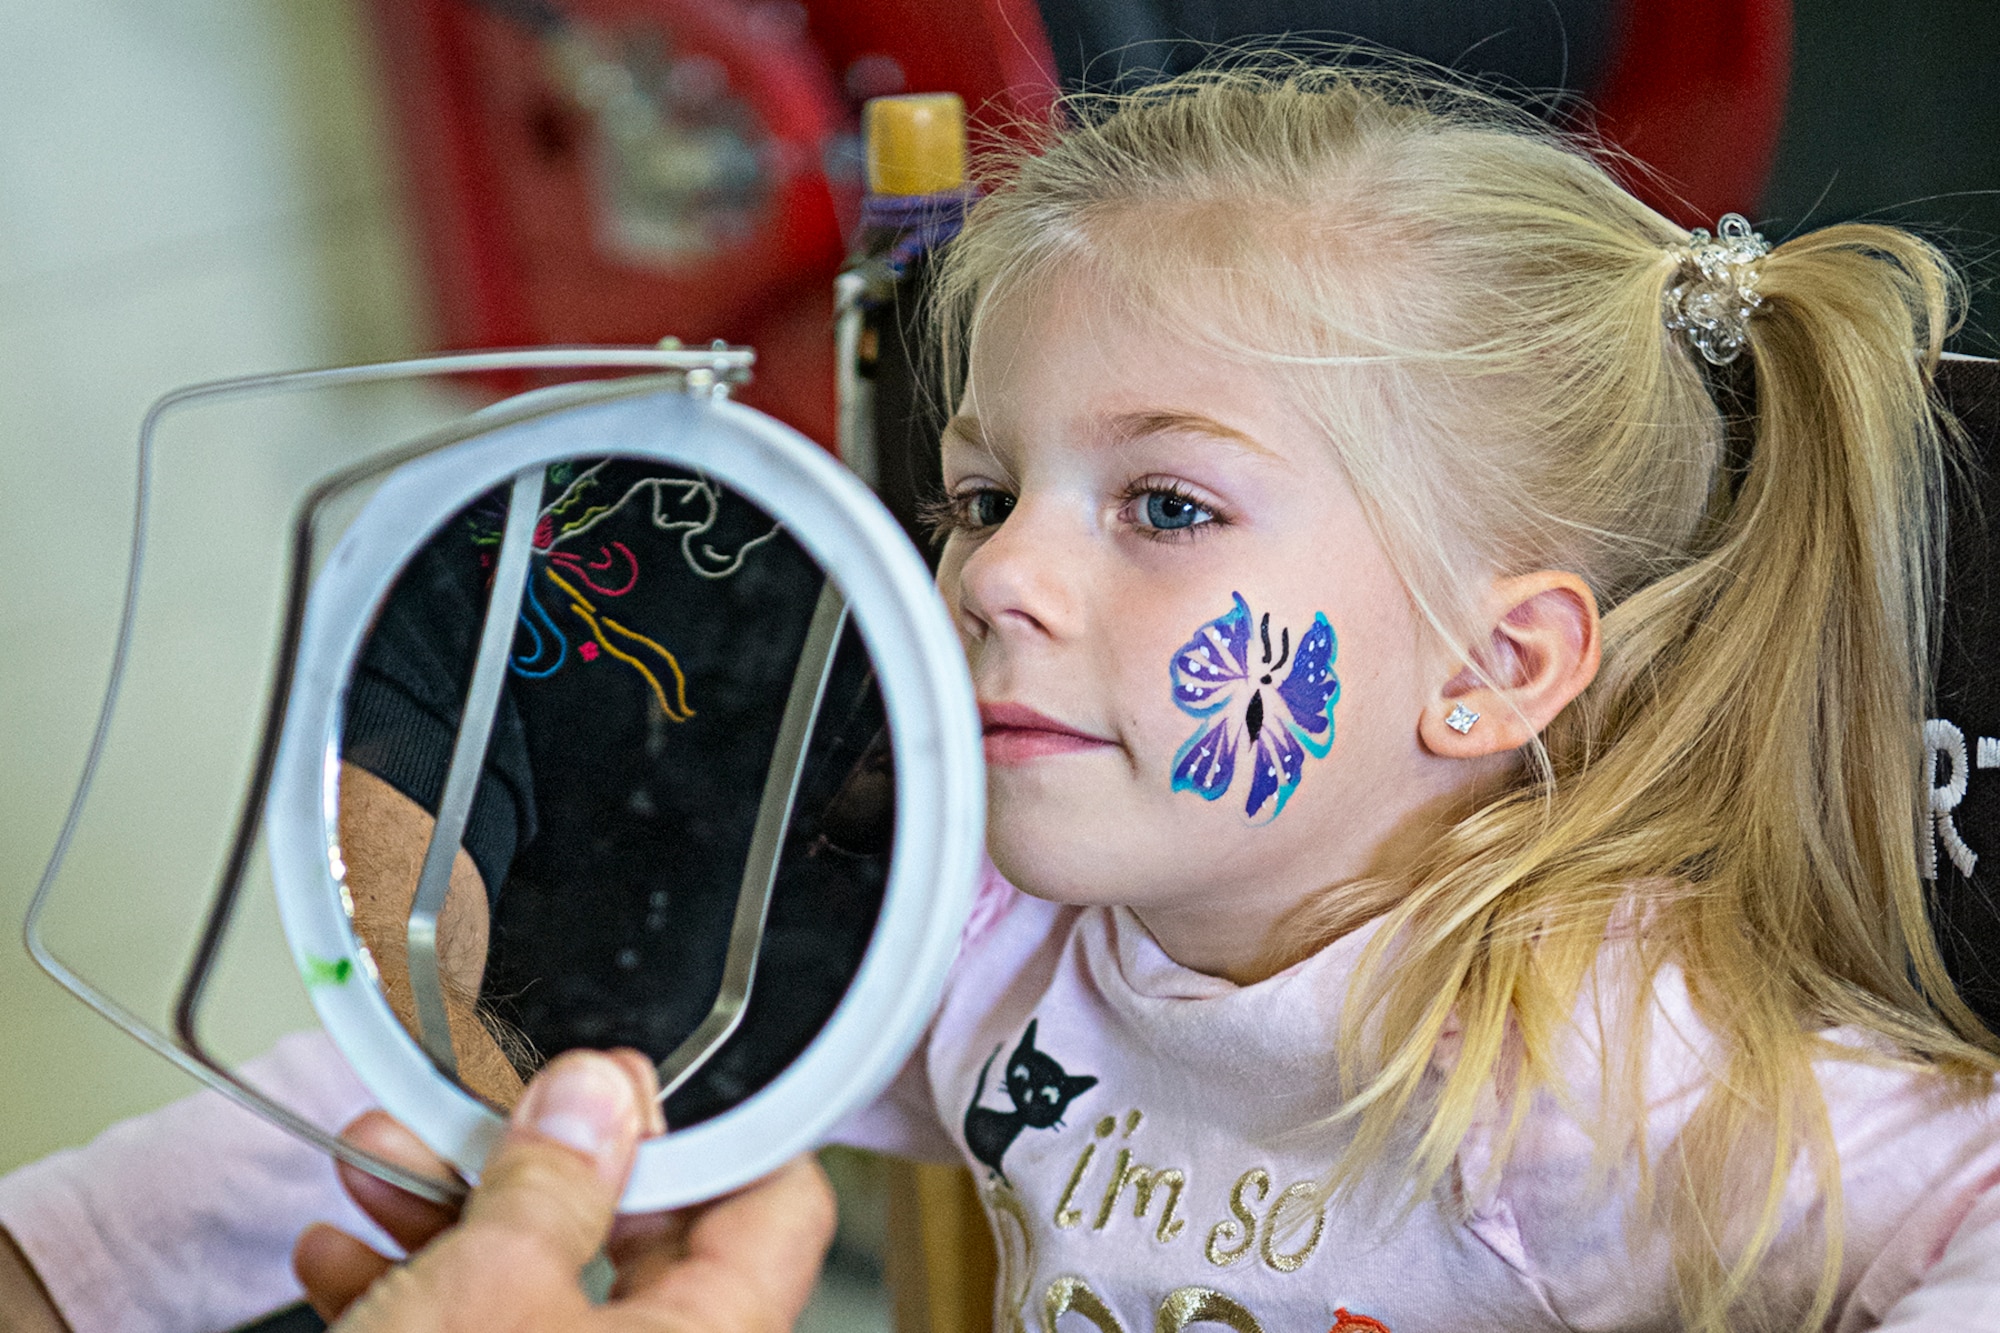 Aubrie Massey, daughter of Staff Sgt. Chris Massey, 434th Air Refueling Wing, checks out the face painter’s handiwork Oct. 5, 2019 during a fall festival at Grissom Air Reserve Base, Indiana. Unit members and their families gathered at the base to promote camaraderie and esprit de corps. (U.S. Air Force photo/Douglas Hays)